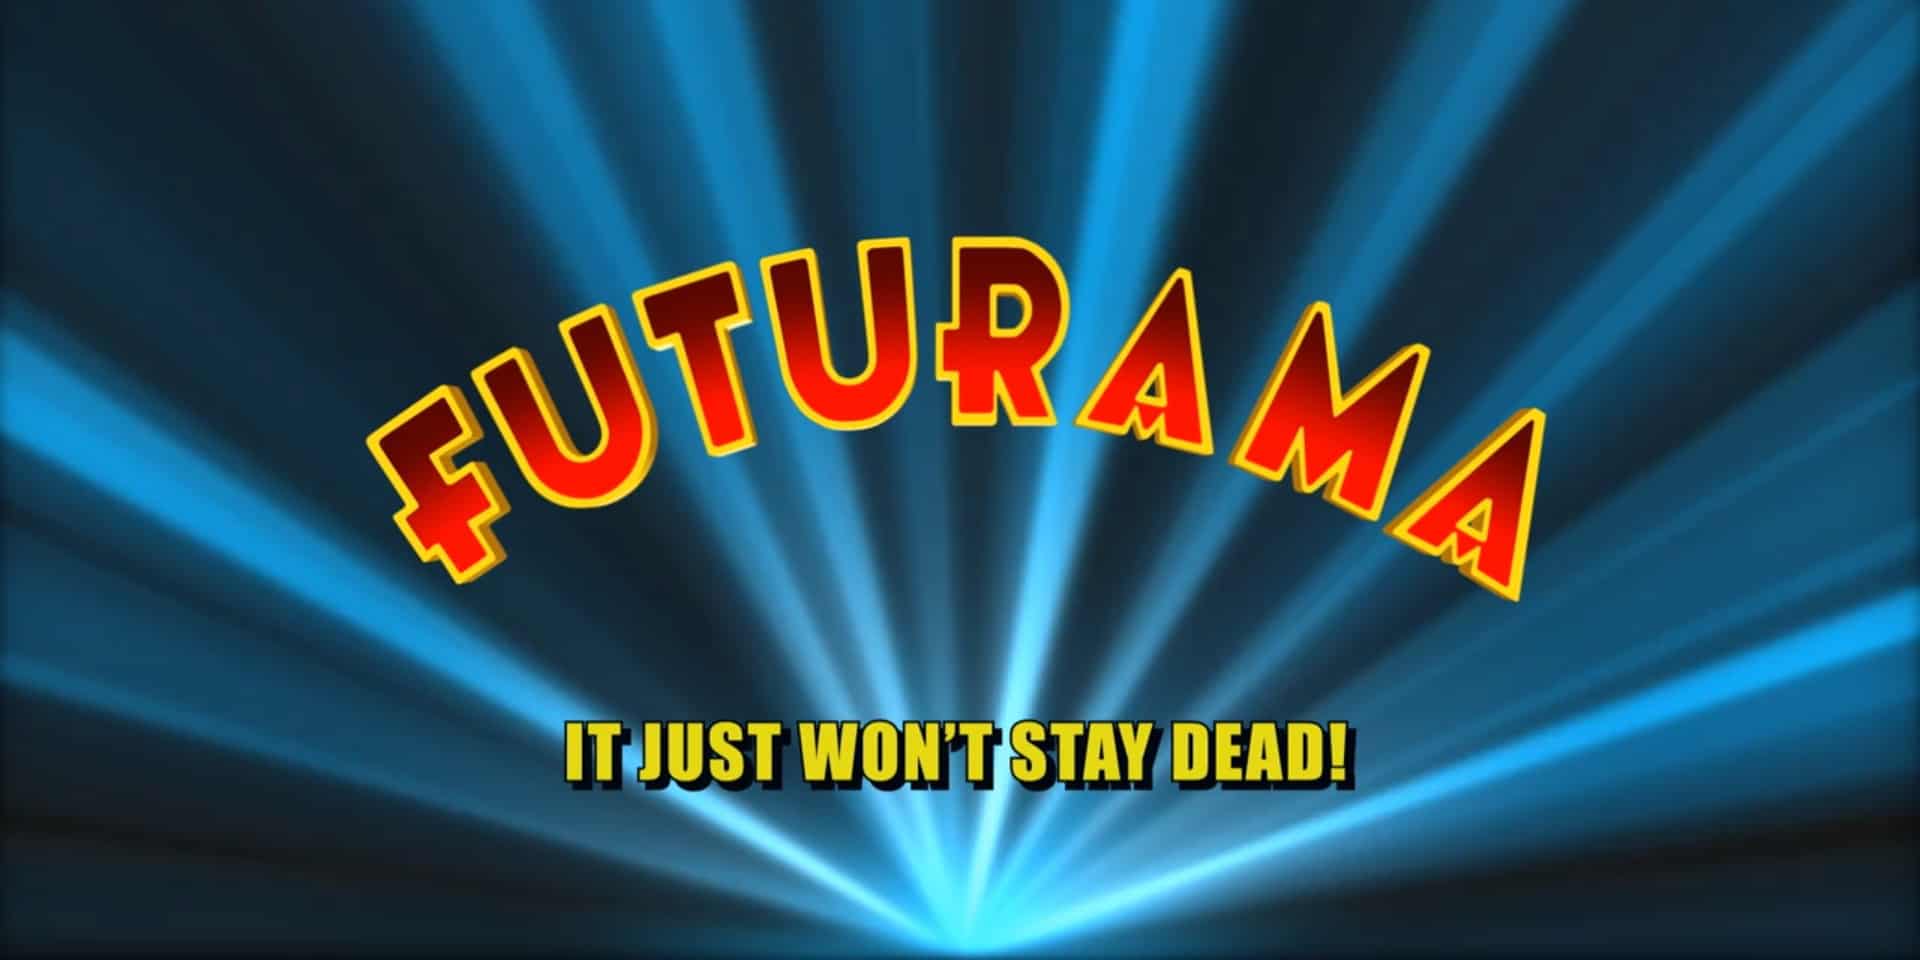 Essential Episodes of ‘Futurama’ to Catch Up on Before the New Season